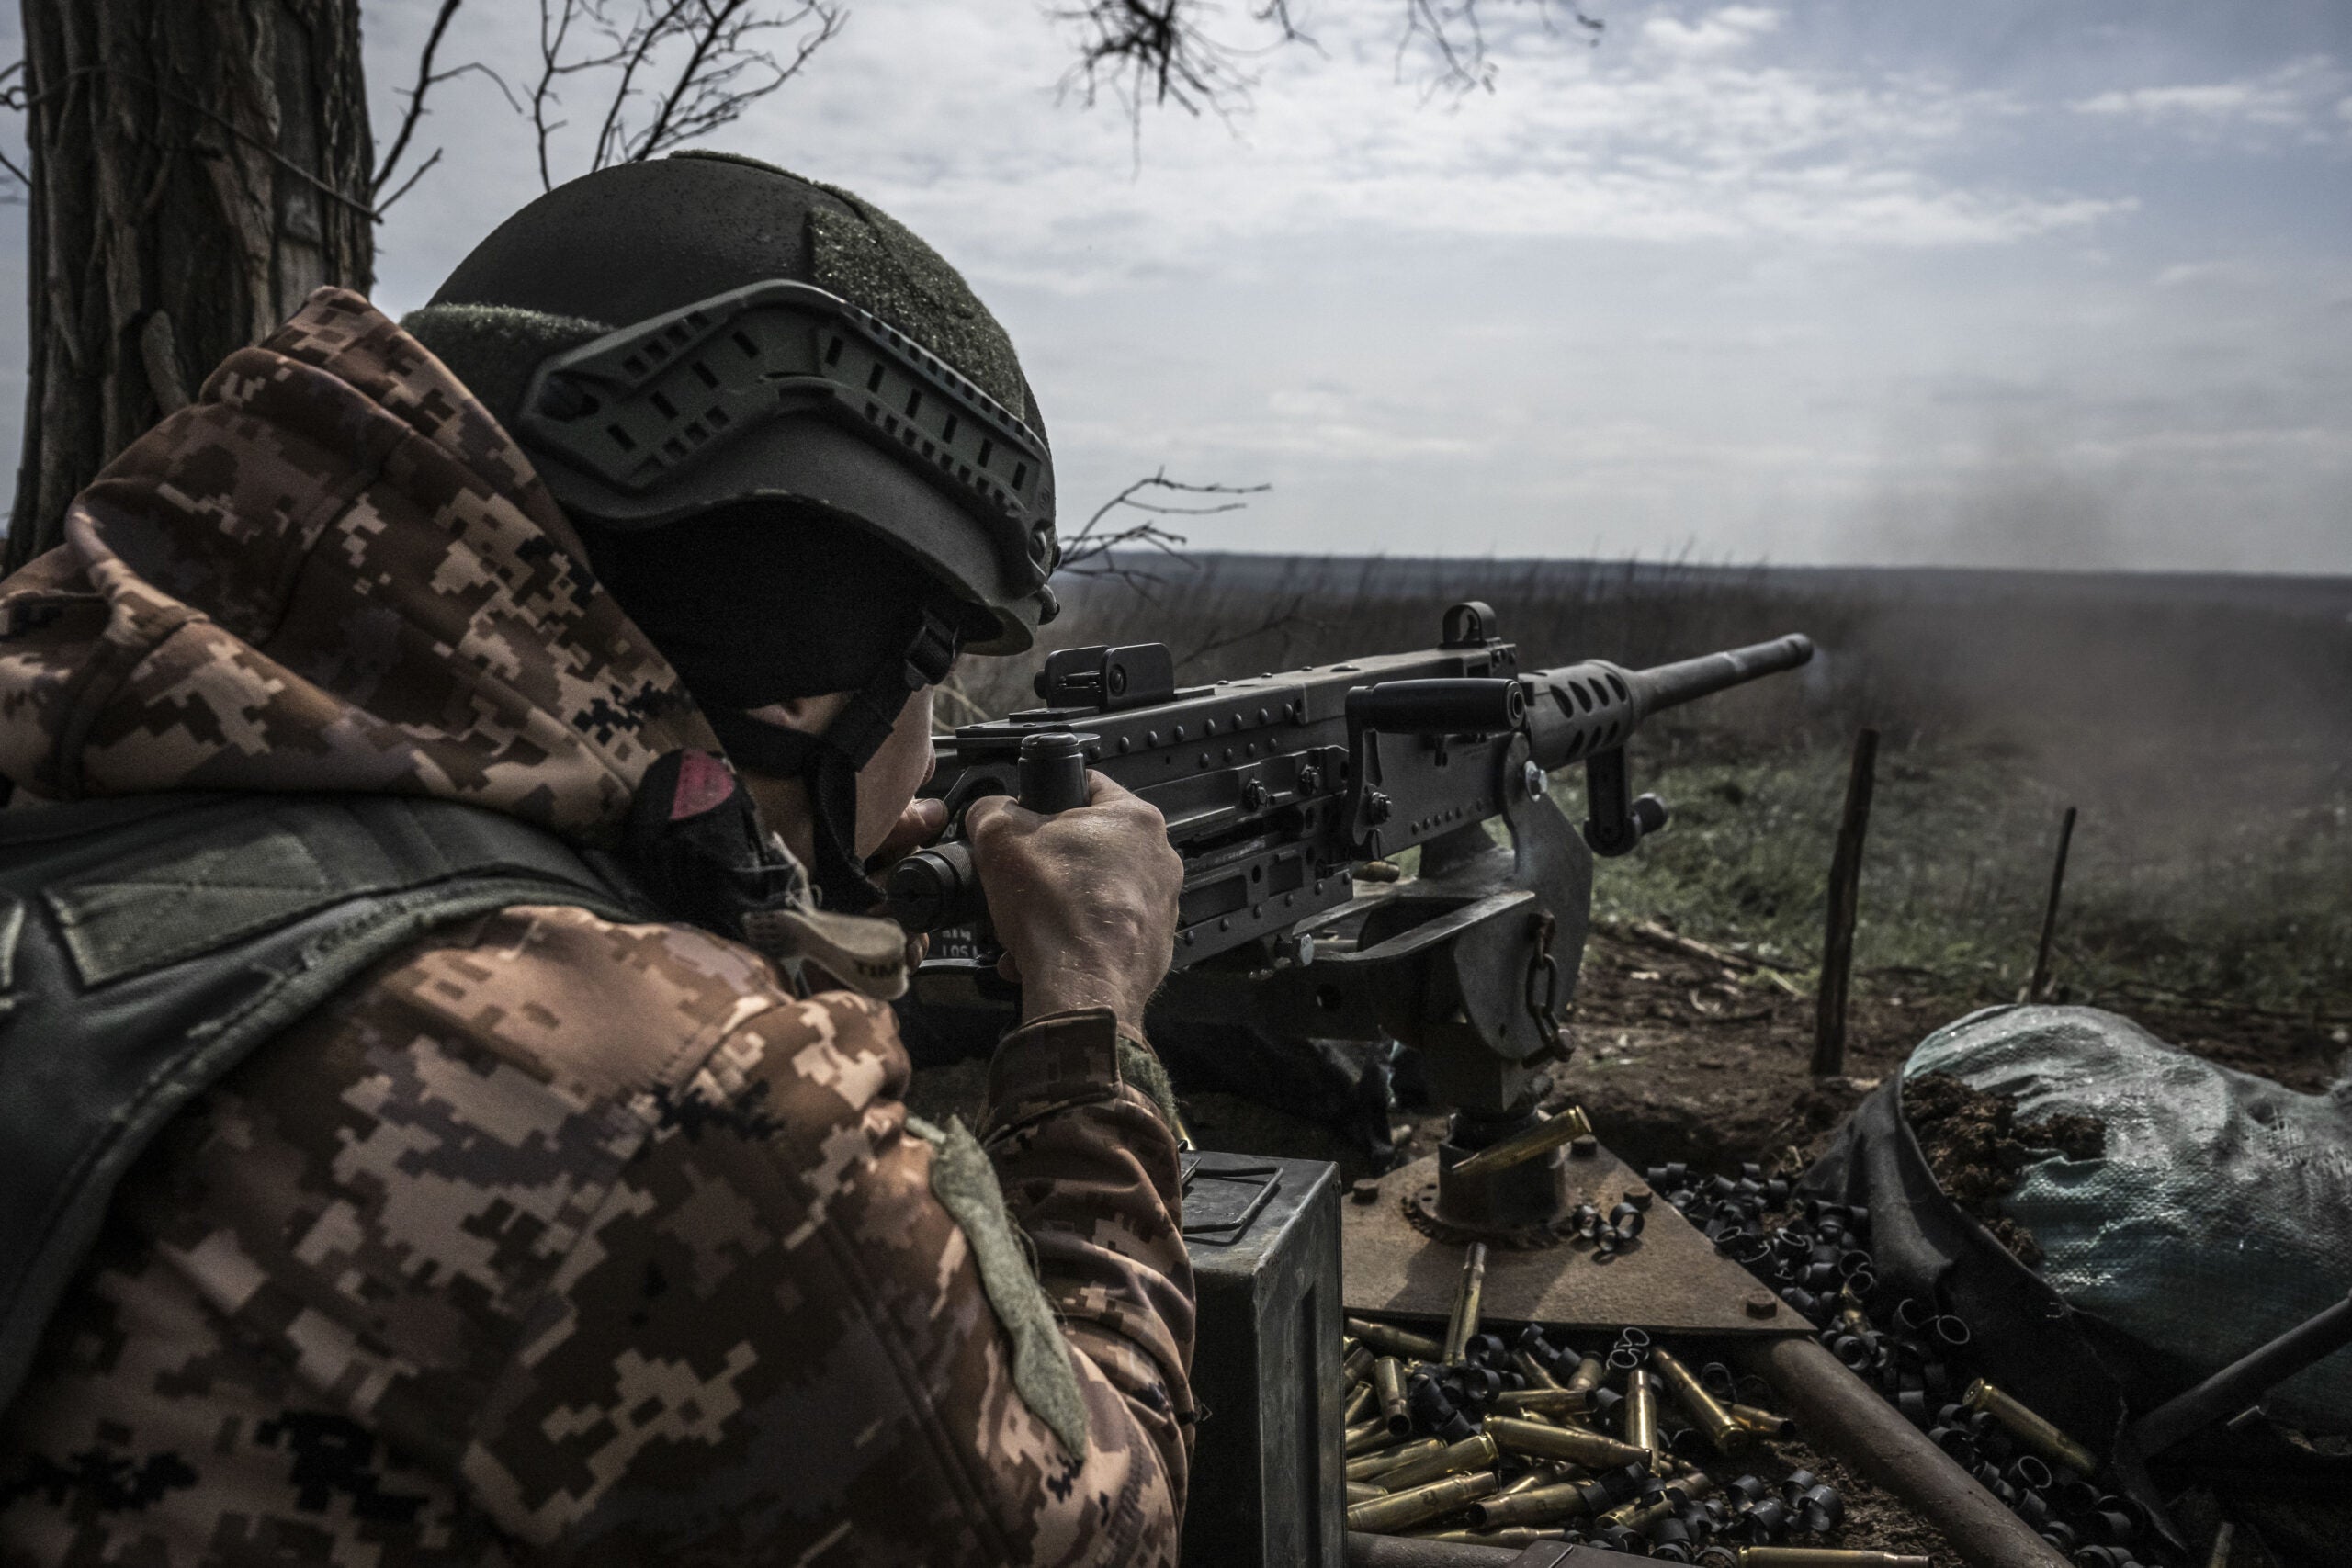 DONETSK, UKRAINE - APRIL 18: Ukrainian soldiers fire targets on the front line in the direction of the city of Ugledar, Donetsk, Ukraine as Russia-Ukraine war continues on April 18, 2023. Heavy weapons are being used in the direction of Ugledar city, which is known as the front where the heaviest tank clashes are occurred. (Photo by Muhammed Enes Yildirim/Anadolu Agency via Getty Images)